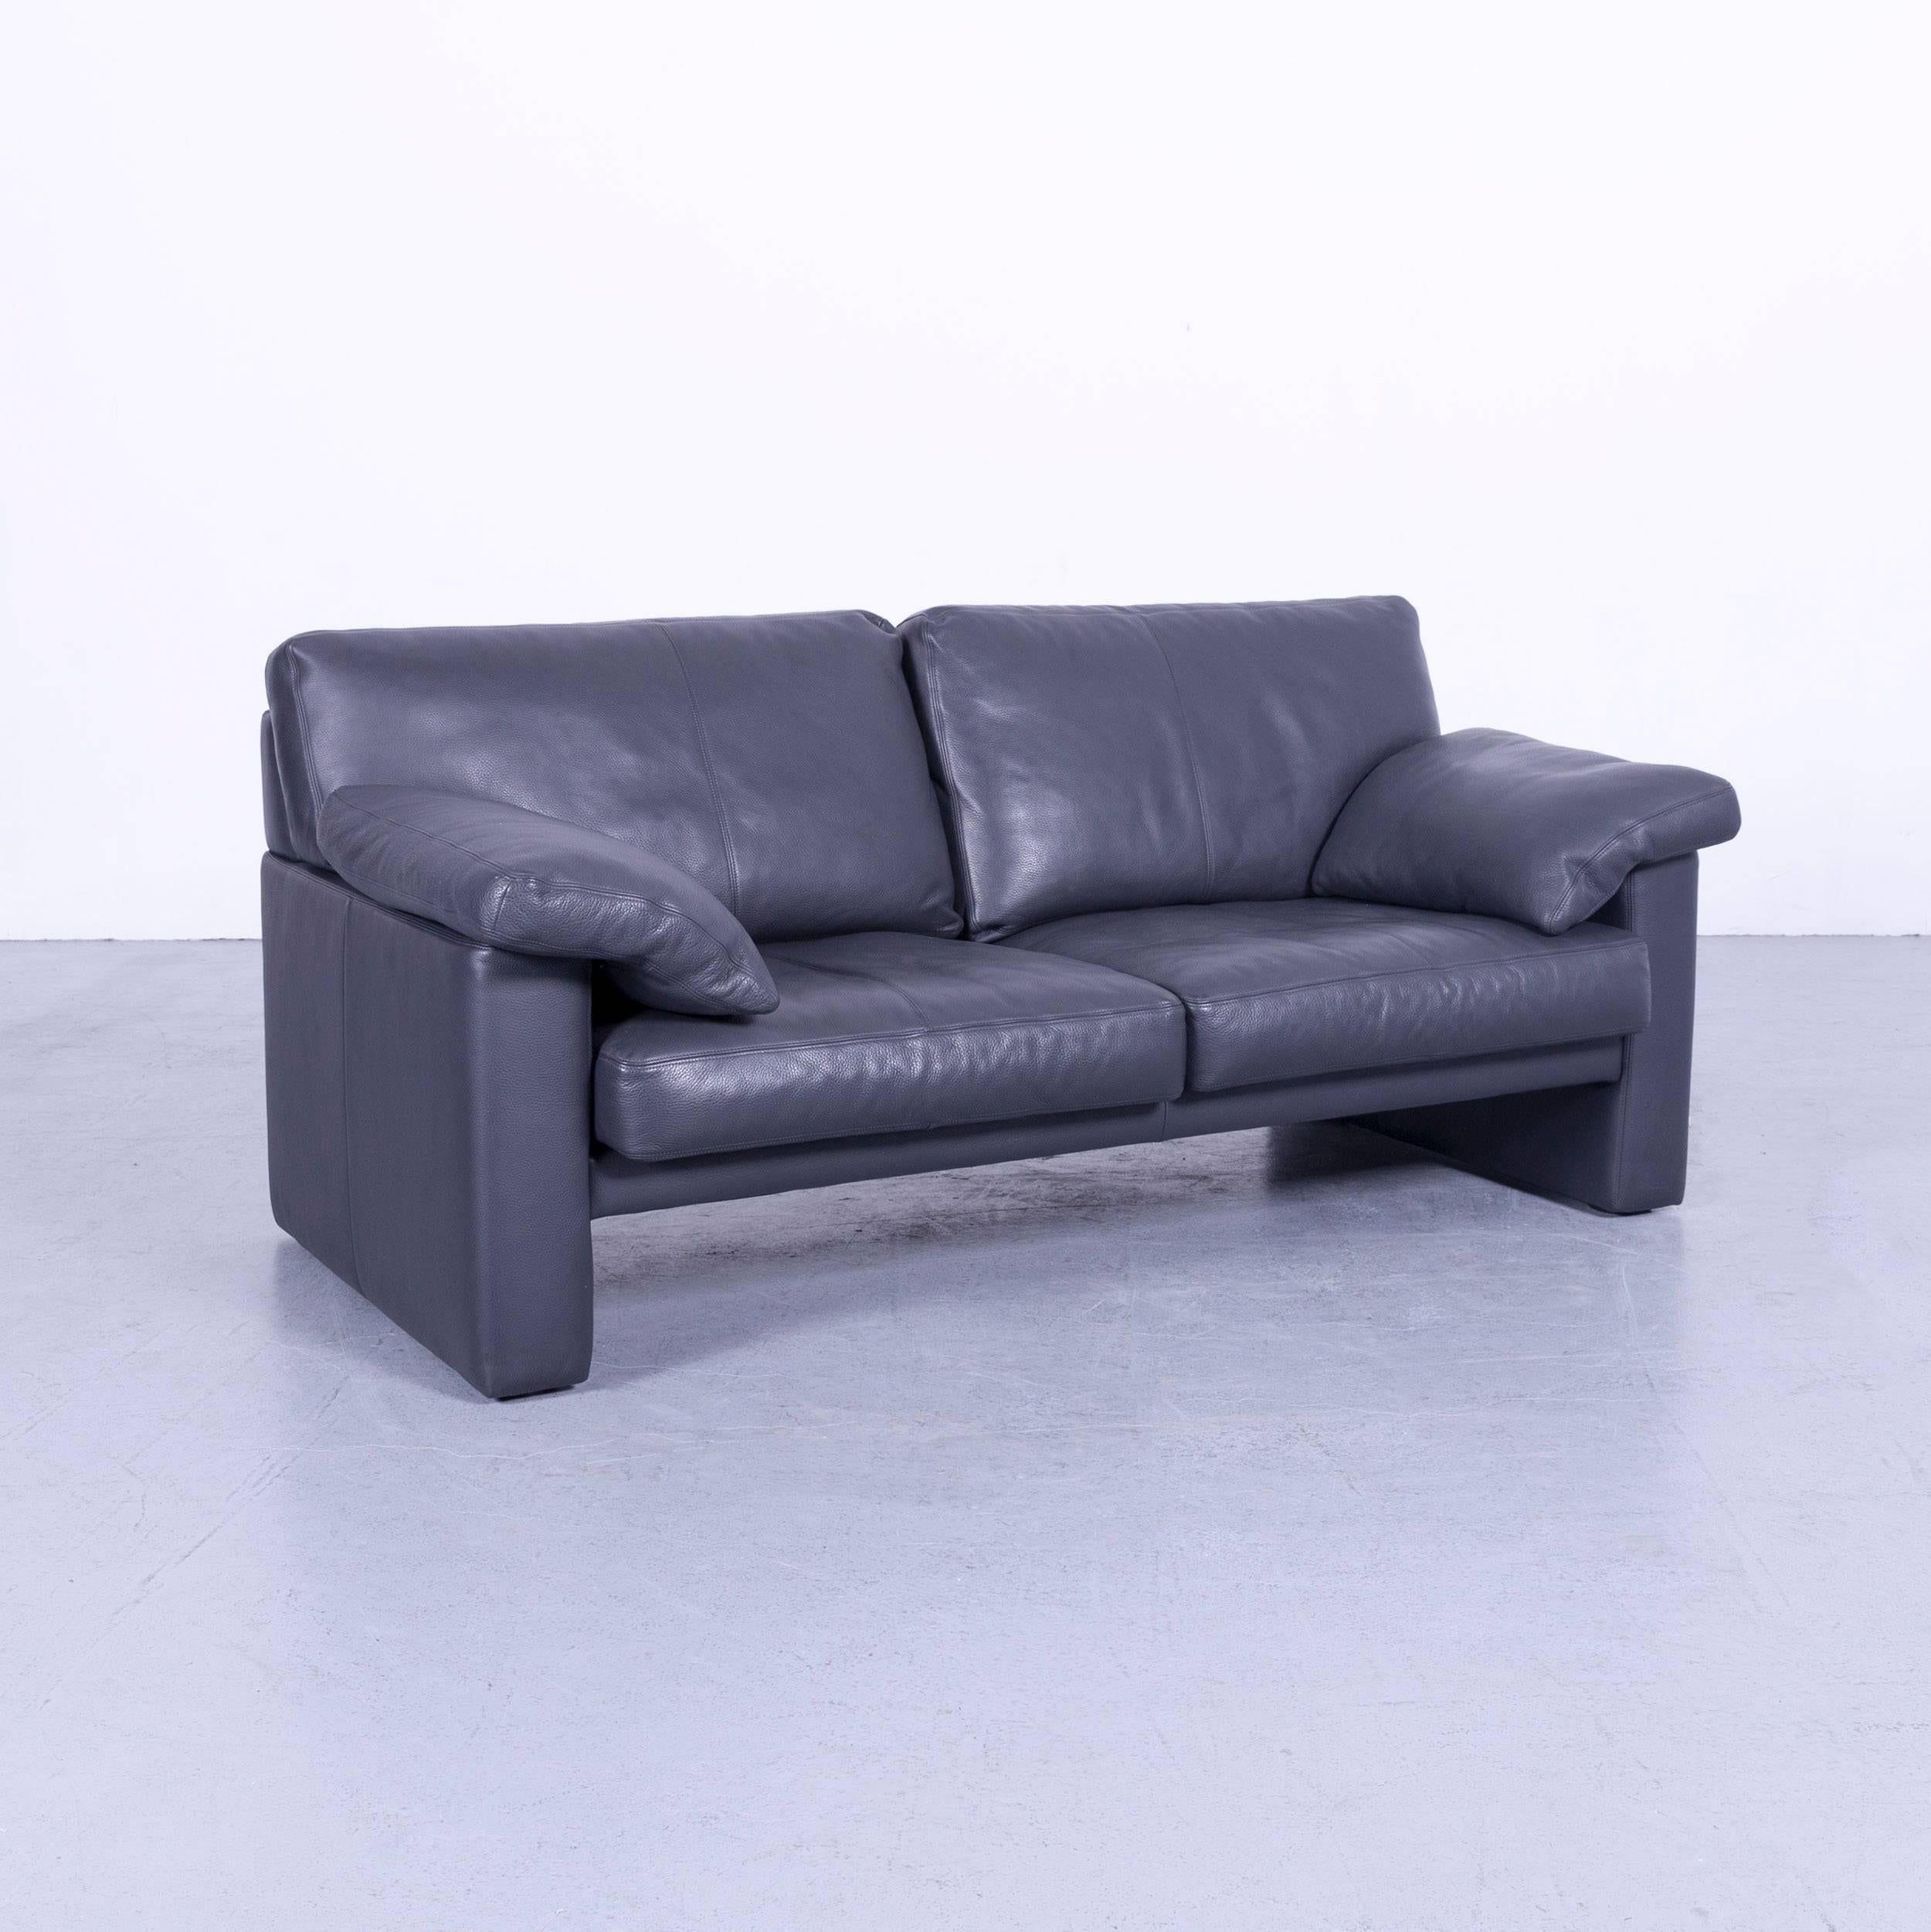 Erpo CL 300 Sofa Set of Two Leather Grey Three/Two-Seat Couch 4